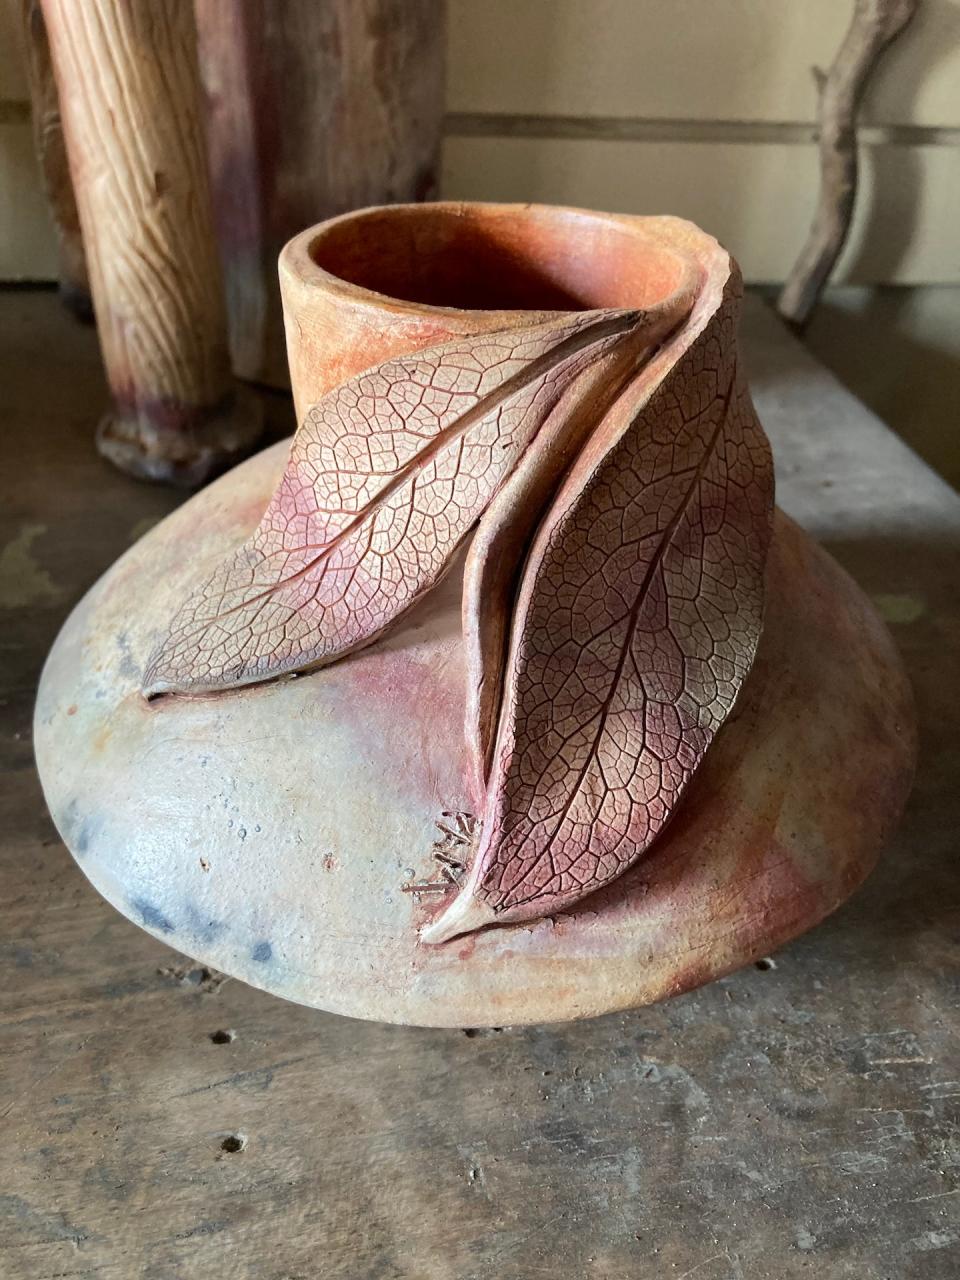 A piece created by Pam Dennis of Flock 9 Studios in Ogden. Dennis will be one of the featured artists during the Art Harvest Tour on Sept. 23-24.